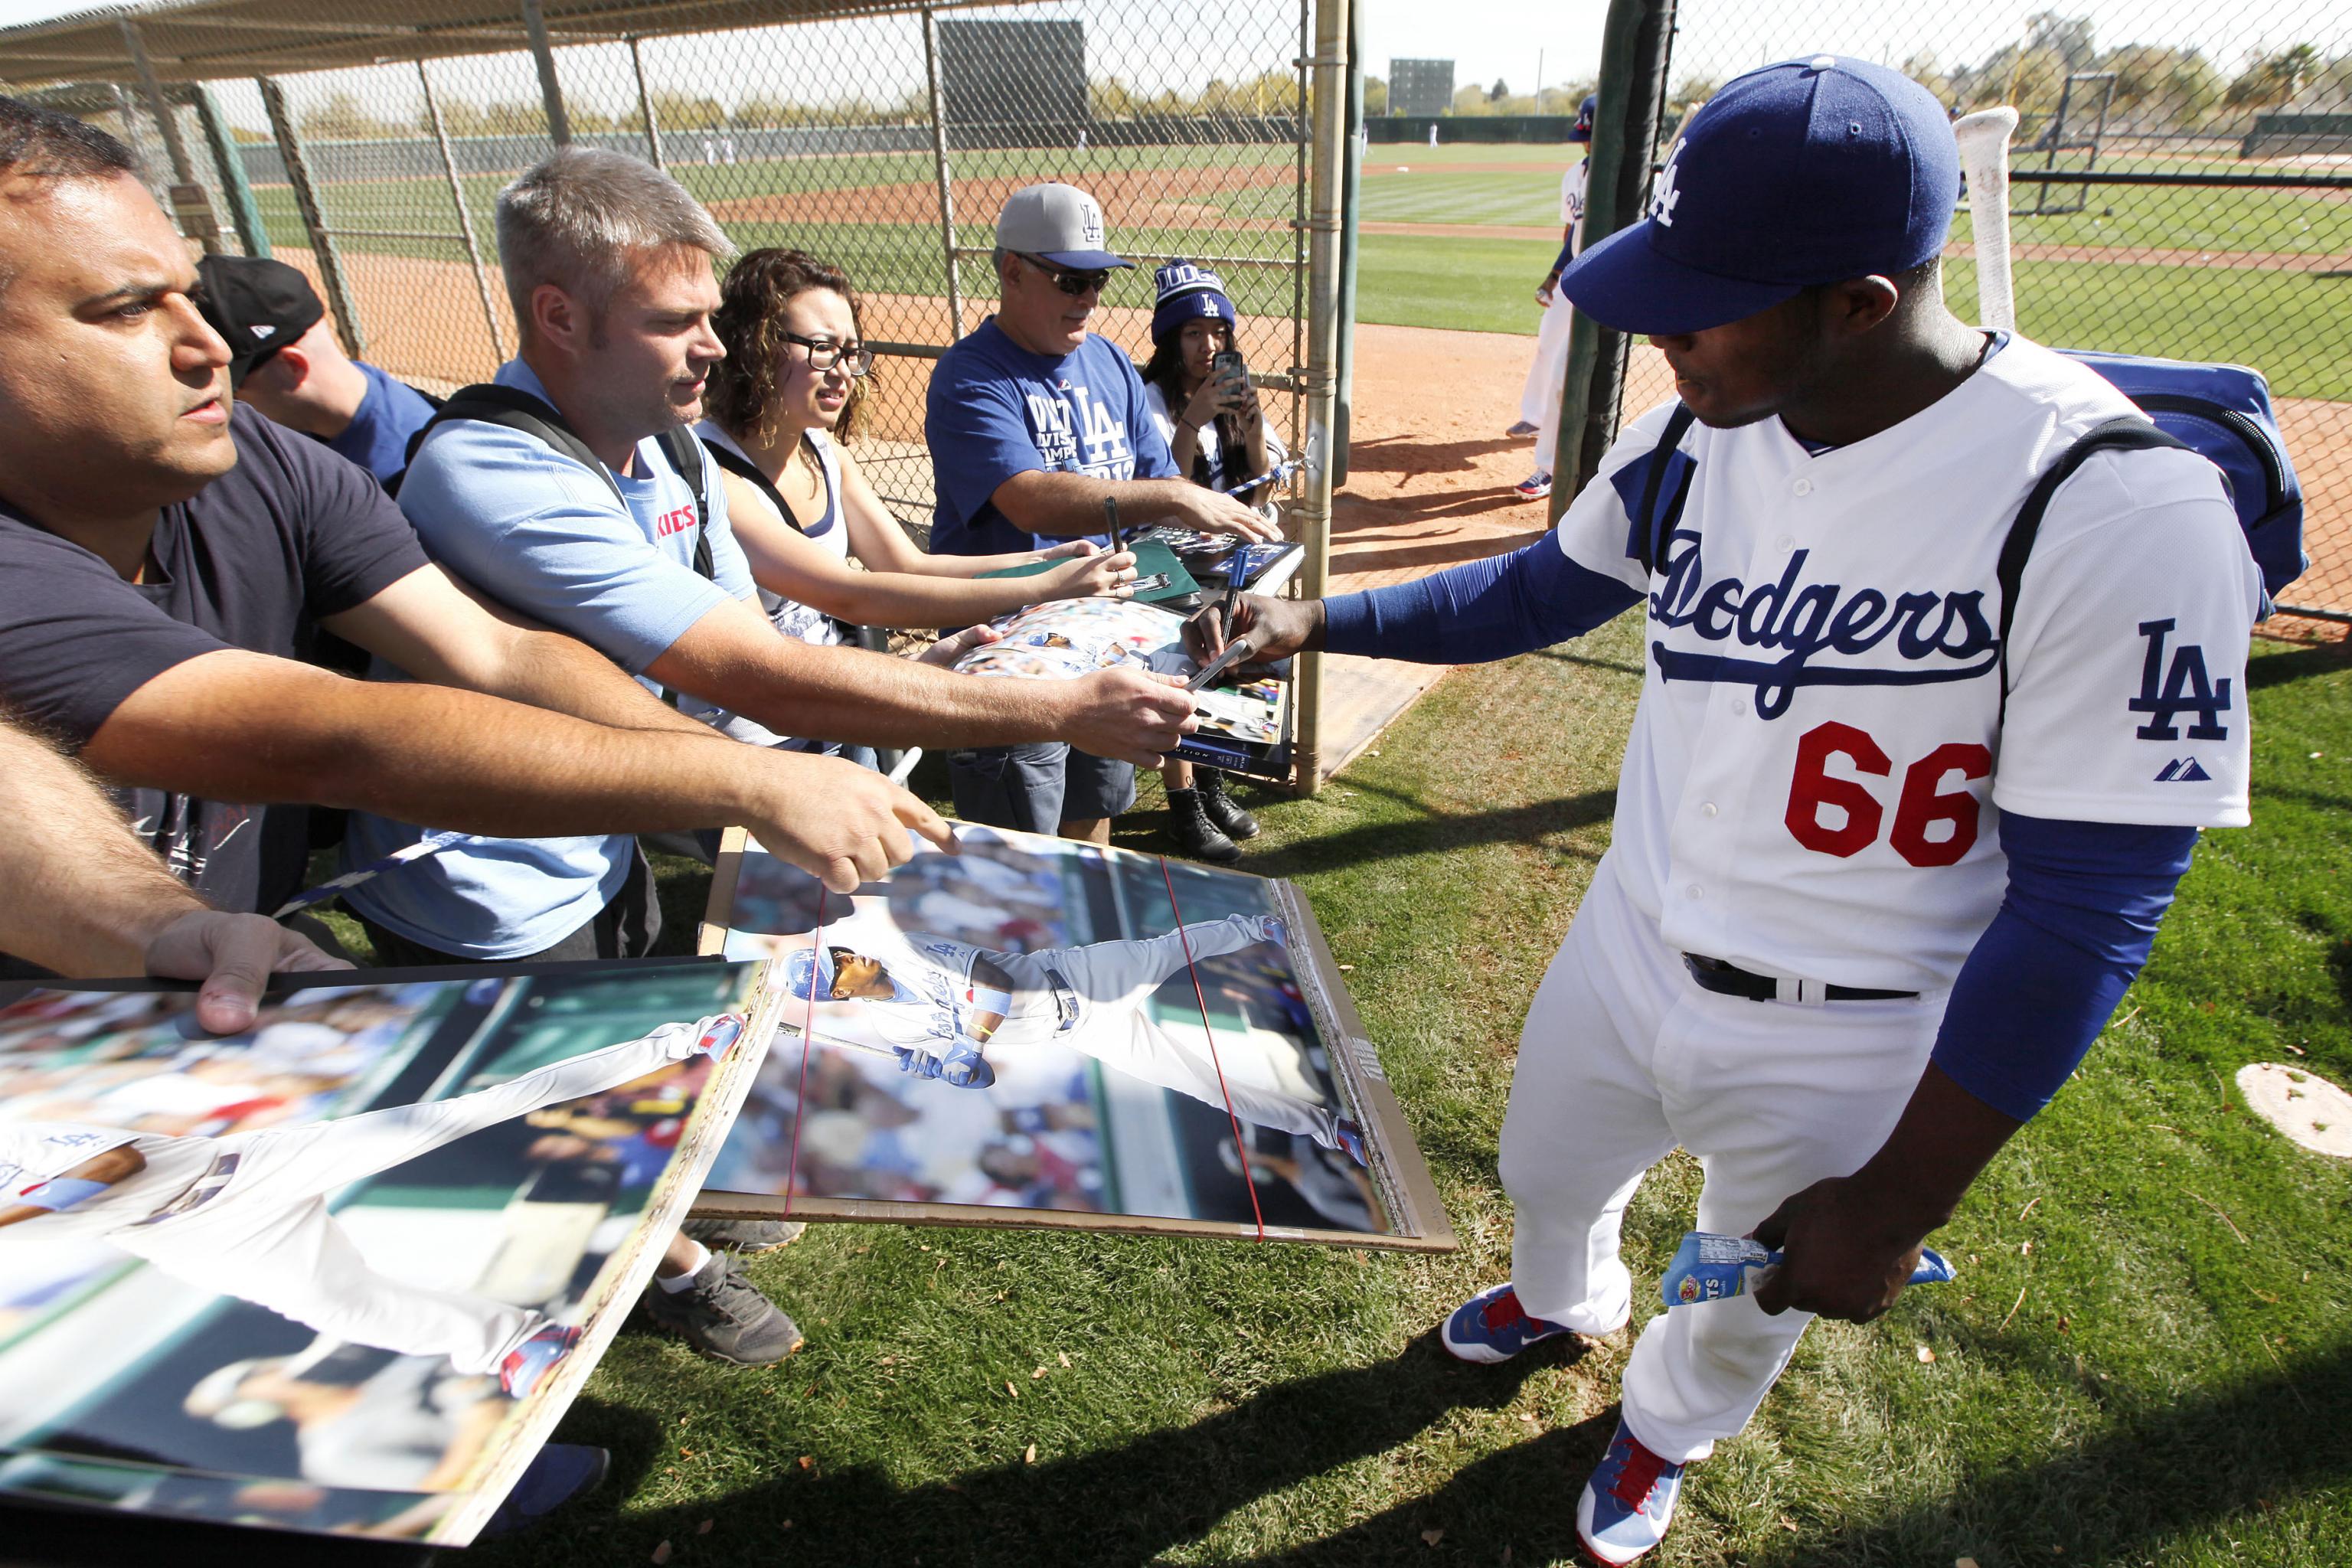 Is Yasiel Puig's Weight Gain Proof He Won't Change His Ways in 2014?, News, Scores, Highlights, Stats, and Rumors